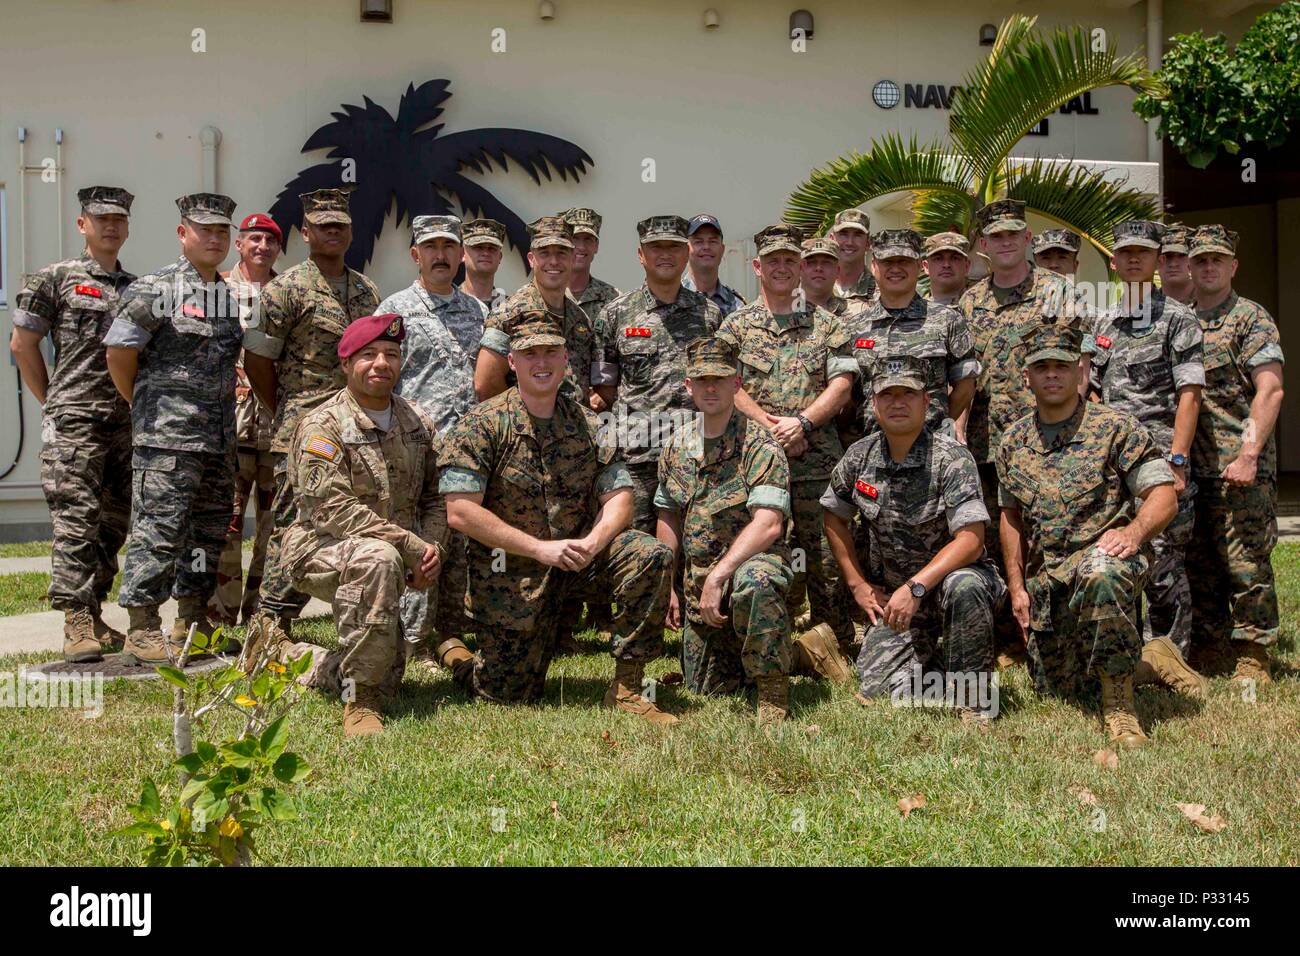 Members of 3D Civil Affairs Group (3D CAG), a subordinate command of Force Headquarters Group (FHG), pose for a photo with their staff counterparts during Ulchi Freedom Guardian 2016 (UFG 16) at Camp Hansen, Okinawa.  During UFG 16, 3D CAG Marines served both on Okinawa and the peninsula.    Exercise UFG 16 is a United Nations Command, U.S. Combined Forces Command, and United States Forces Korea annual joint/combined command post exercise.  The exercise highlights the longstanding and enduring partnership and friendship between the United States and South Korea, and the nations’ combined commi Stock Photo